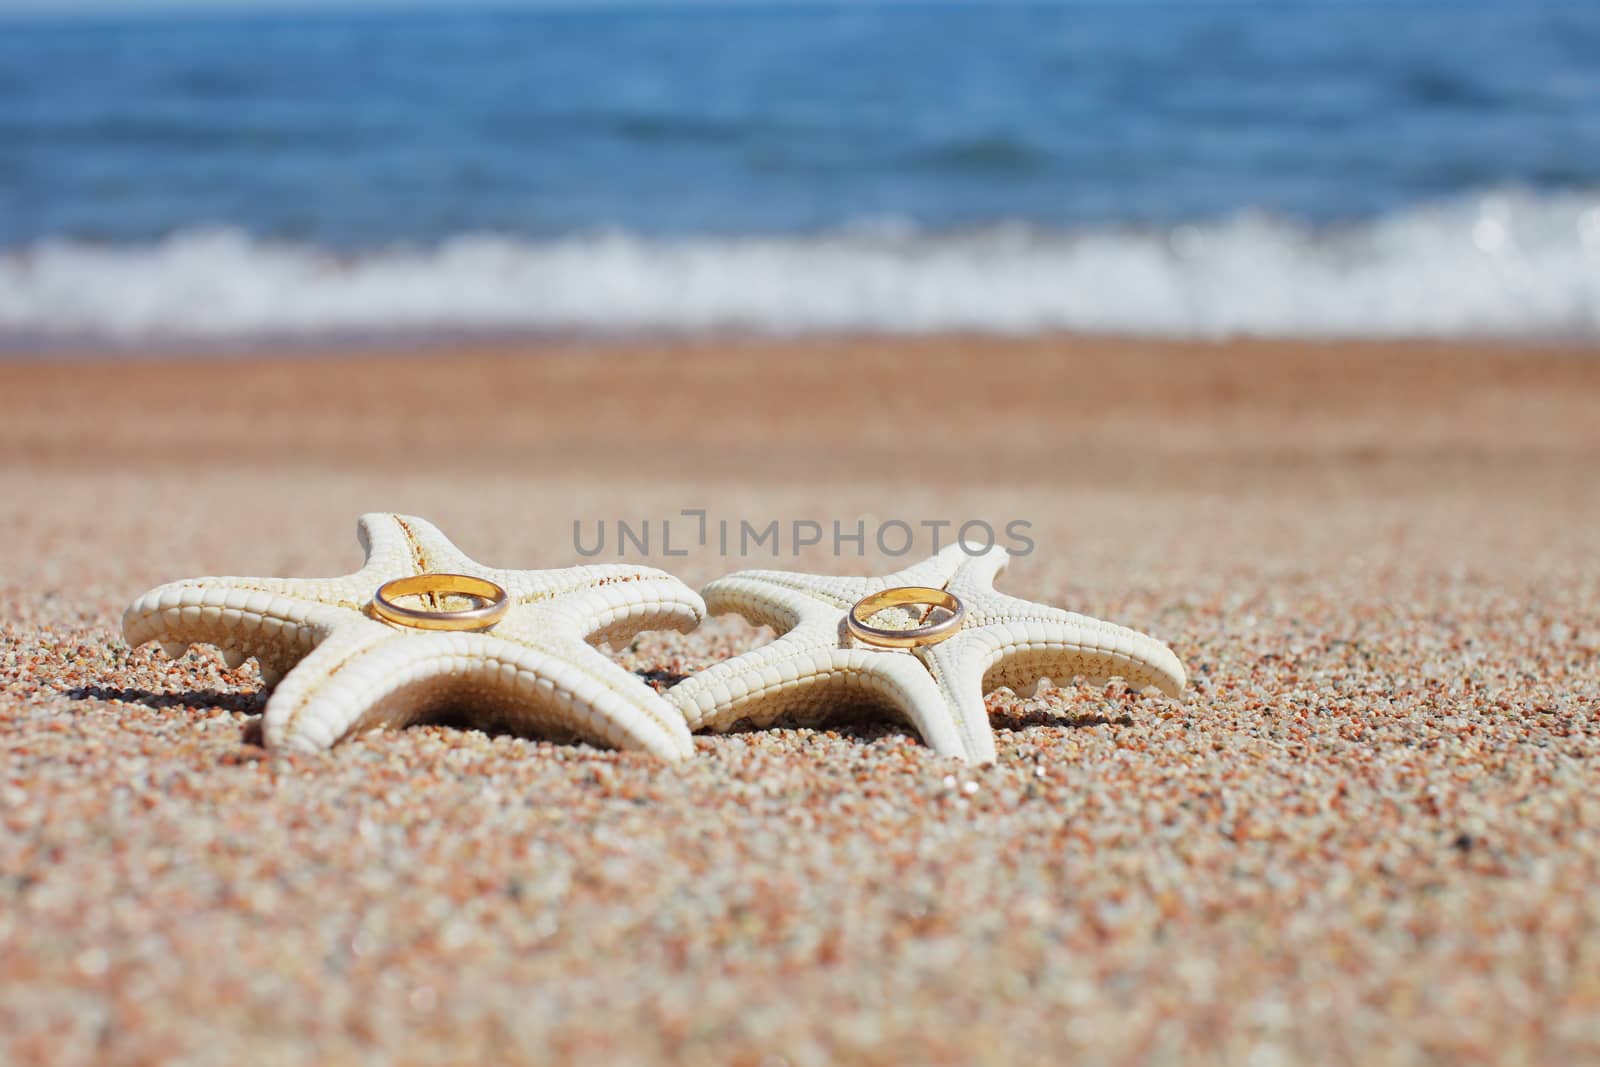 Starfish with wedding rings on the beach. Summer vacation concept. Family holidays by the sea. High quality photo